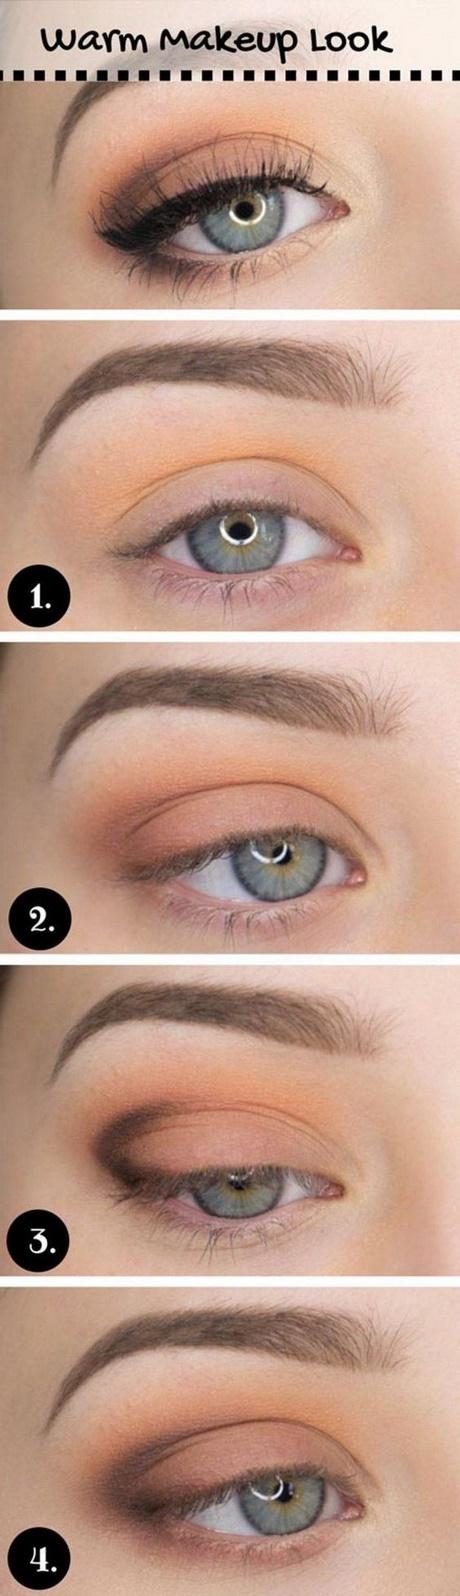 classy-everyday-makeup-tutorial-74_6 Stijlvolle alledaagse make-up les